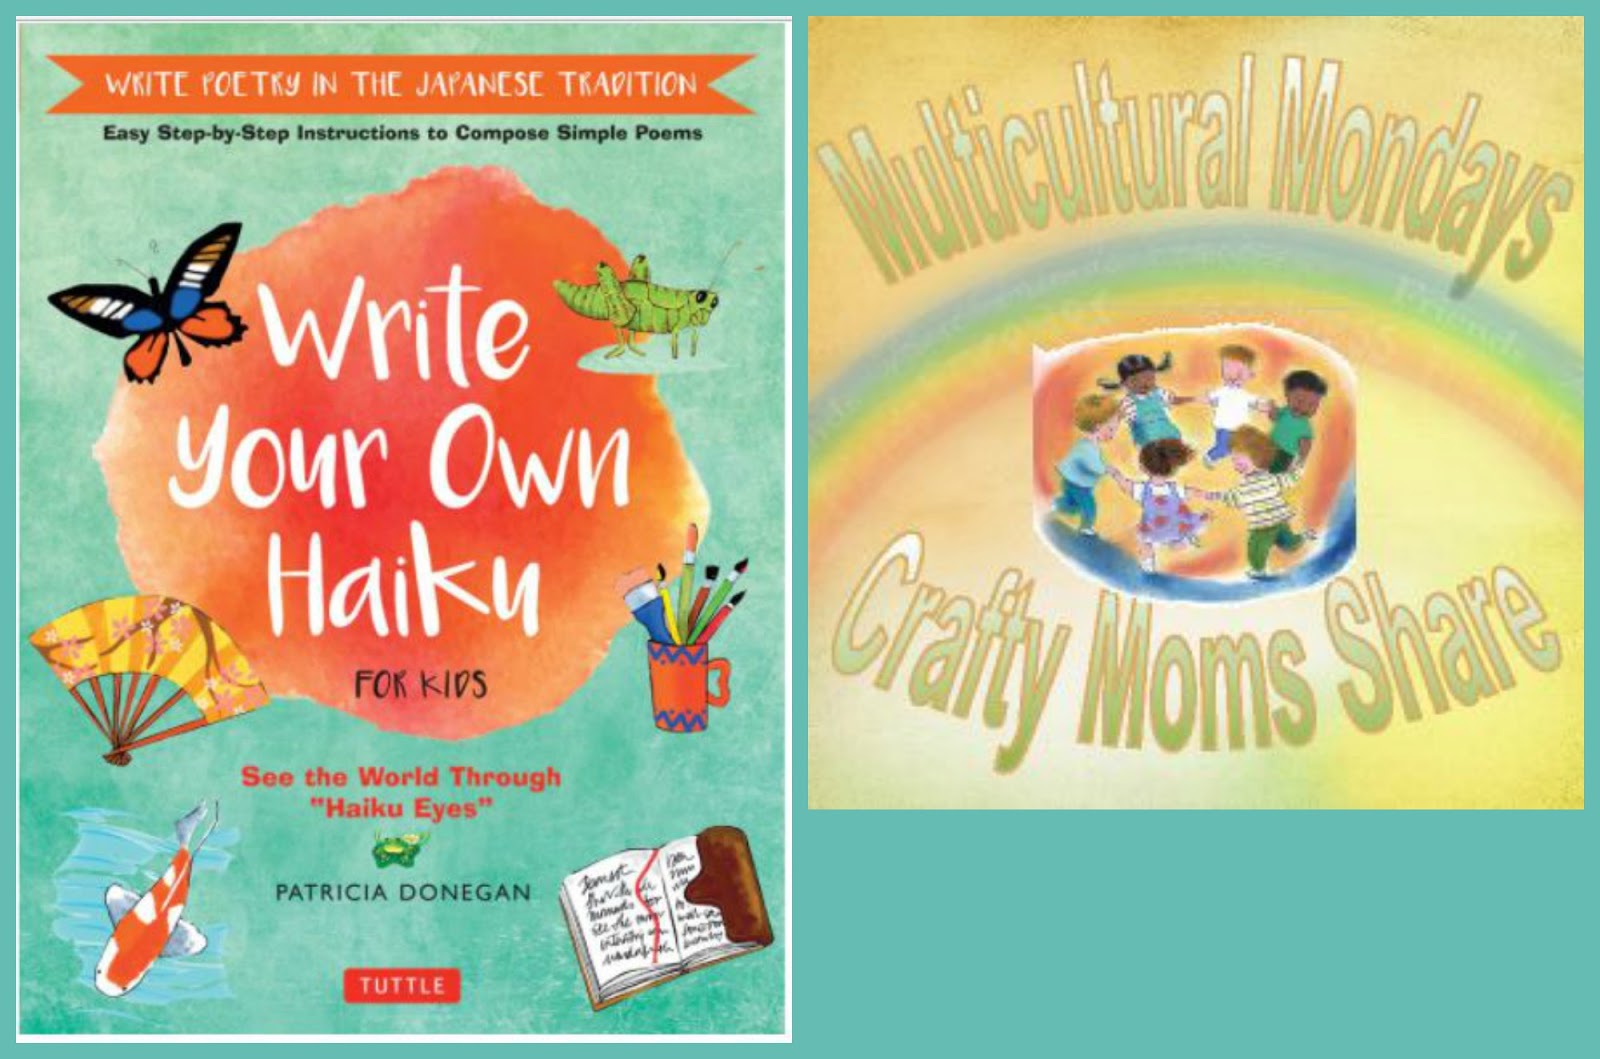 Crafty Moms Share: Write Your Own Haiku for Kids Review